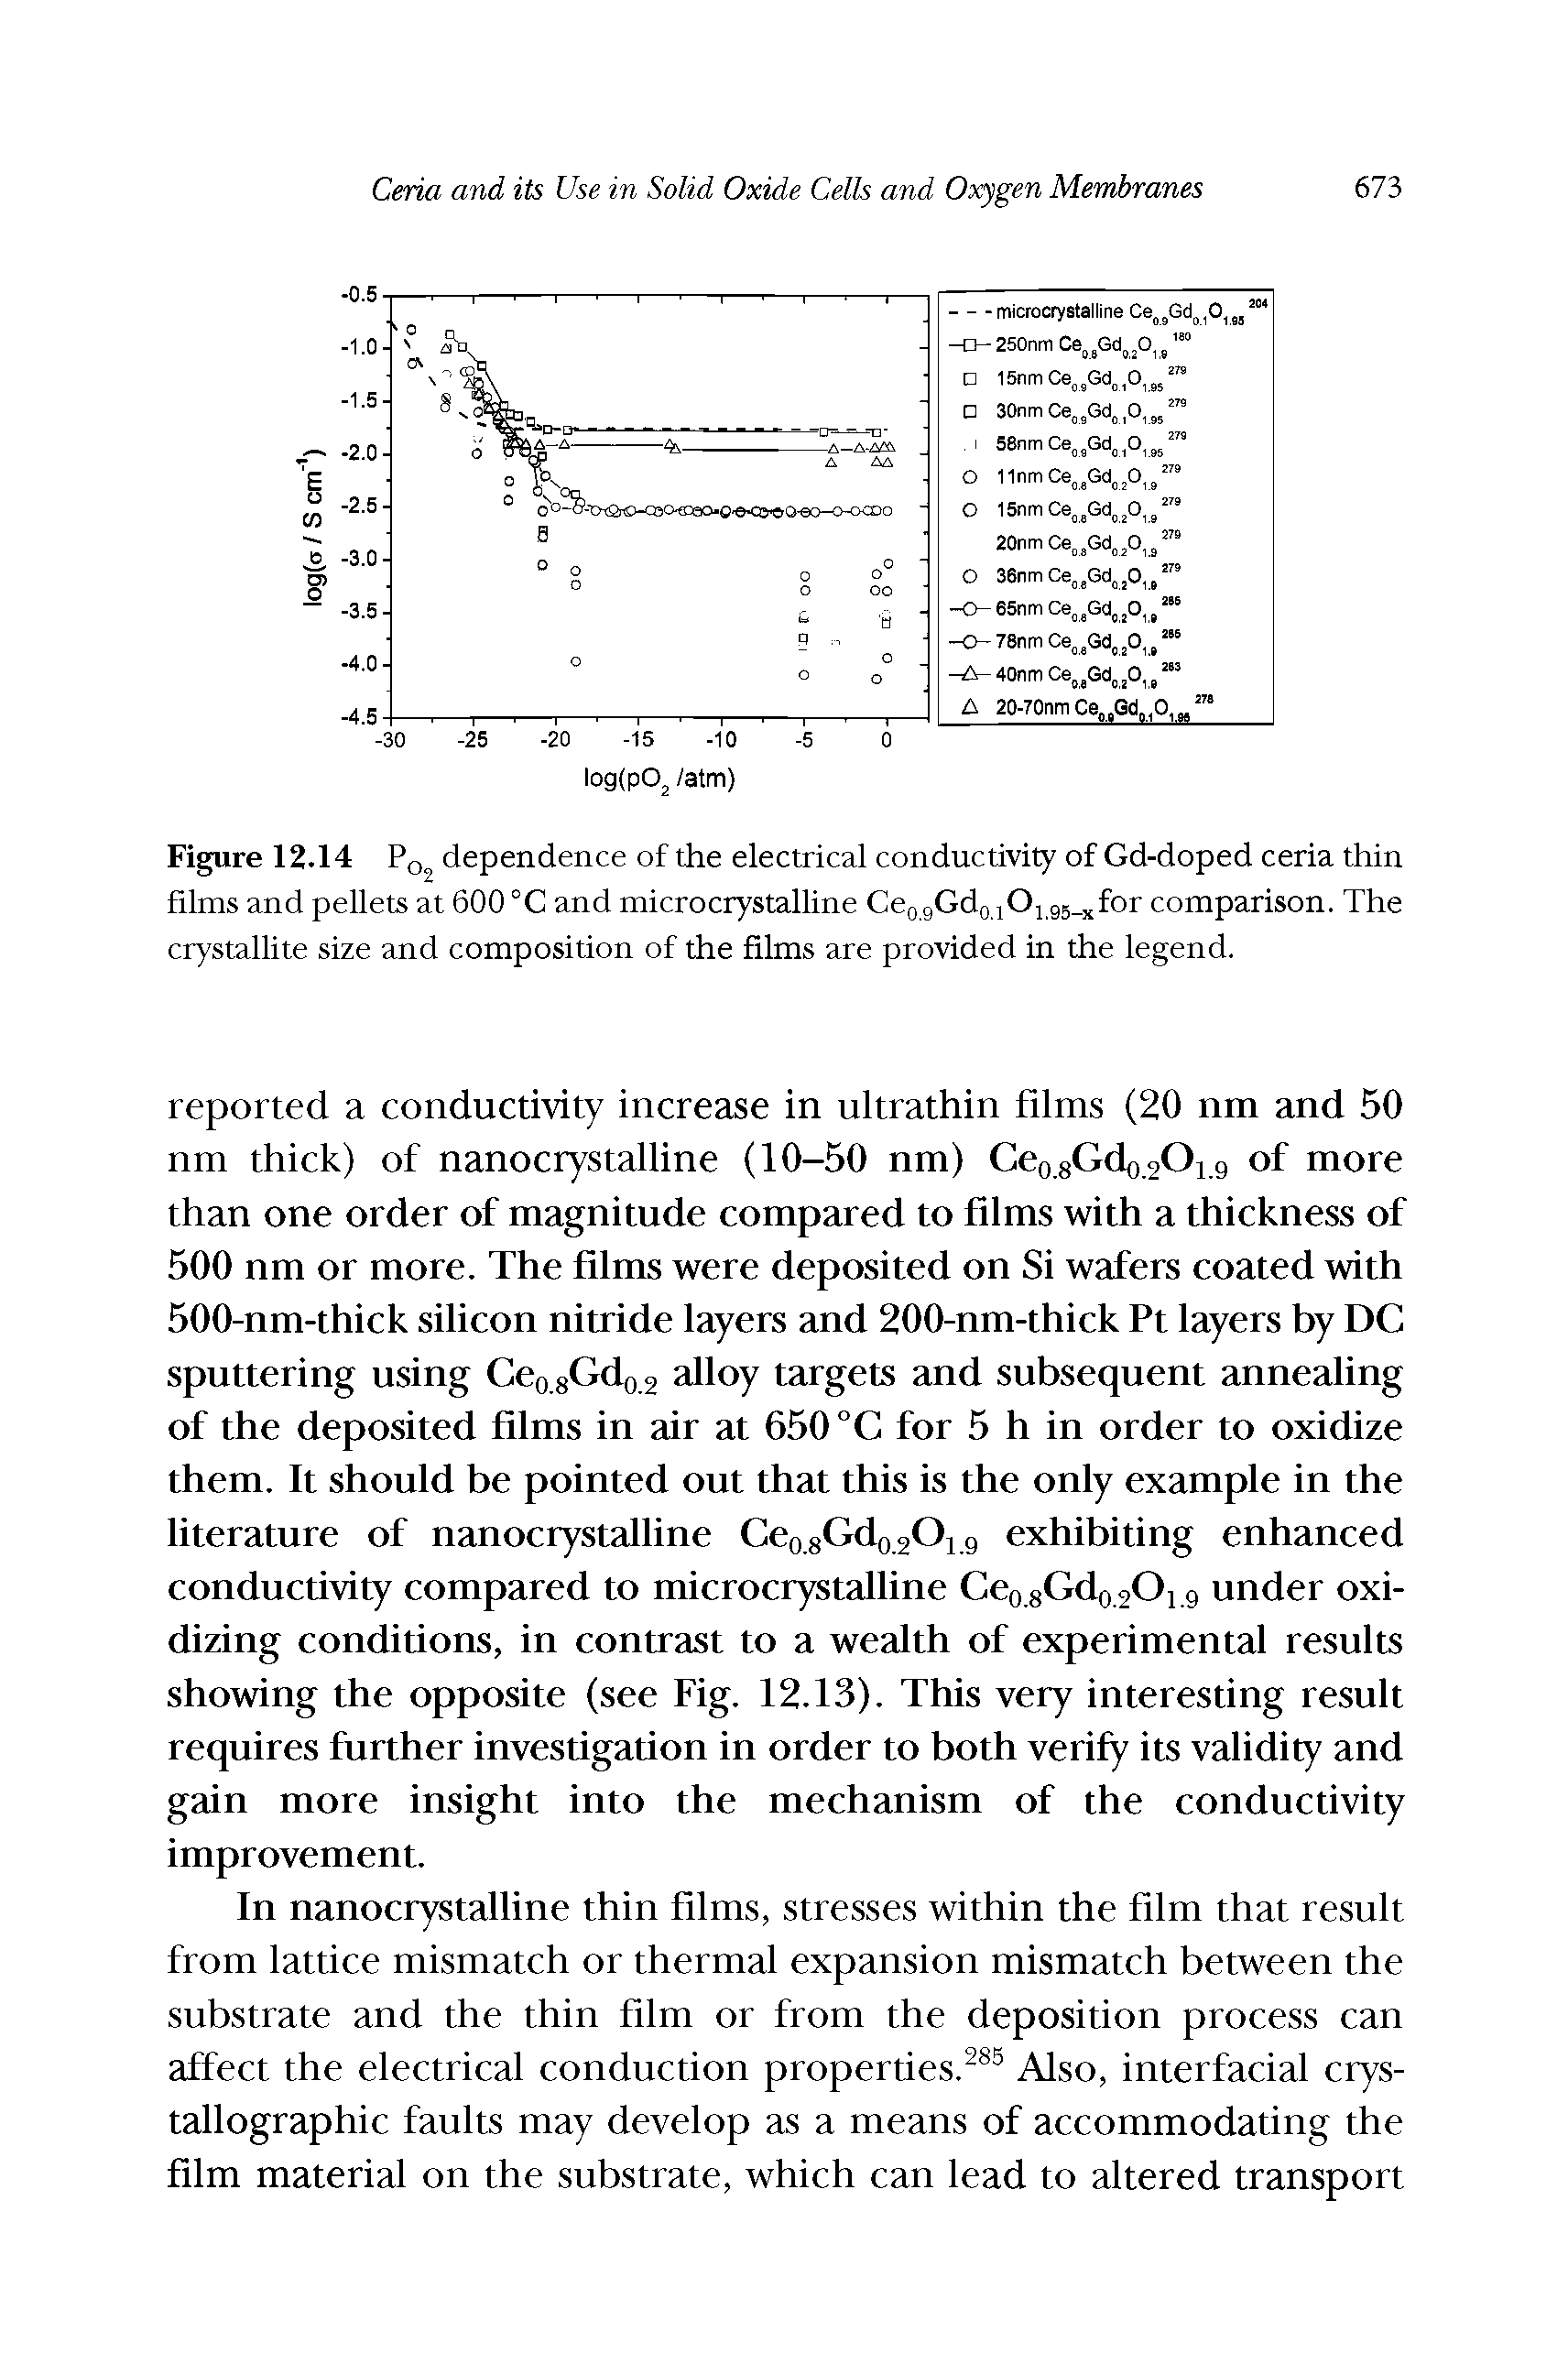 Figure 12.14 Pq dependence of the electrical conductivity of Gd-doped ceria thin films and pellets at 600 °C and microcrystalline CeogGdo jOj gs. for comparison. The crystallite size and composition of the films are provided in the legend.